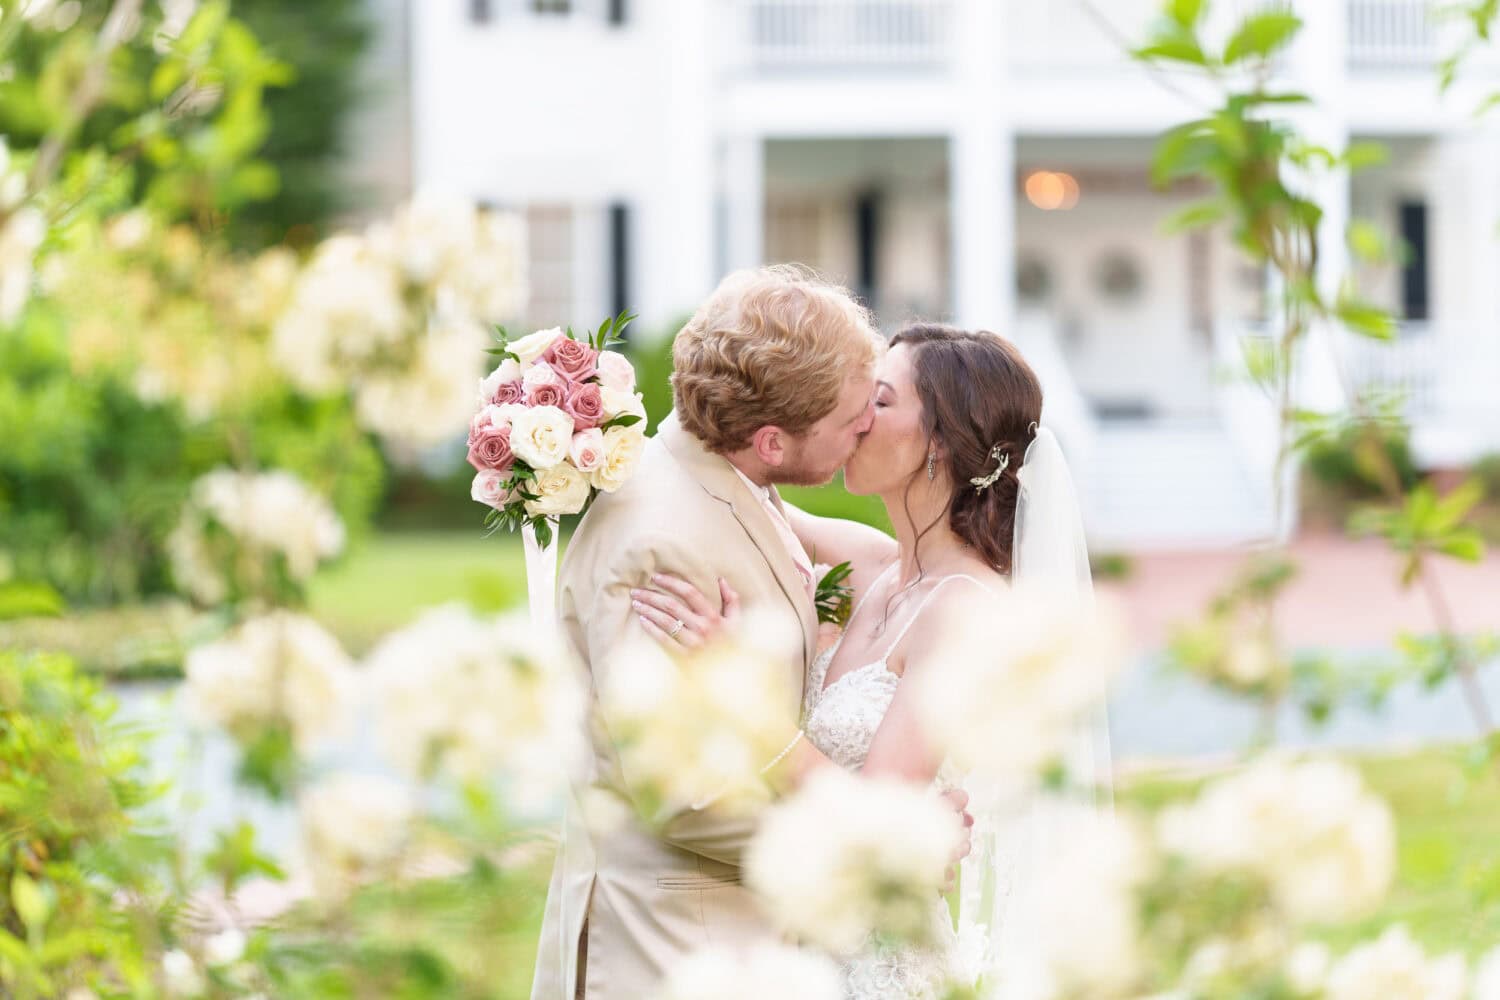 Portraits of the bride and groom surrounded by the flowers - Tanglewood Plantation